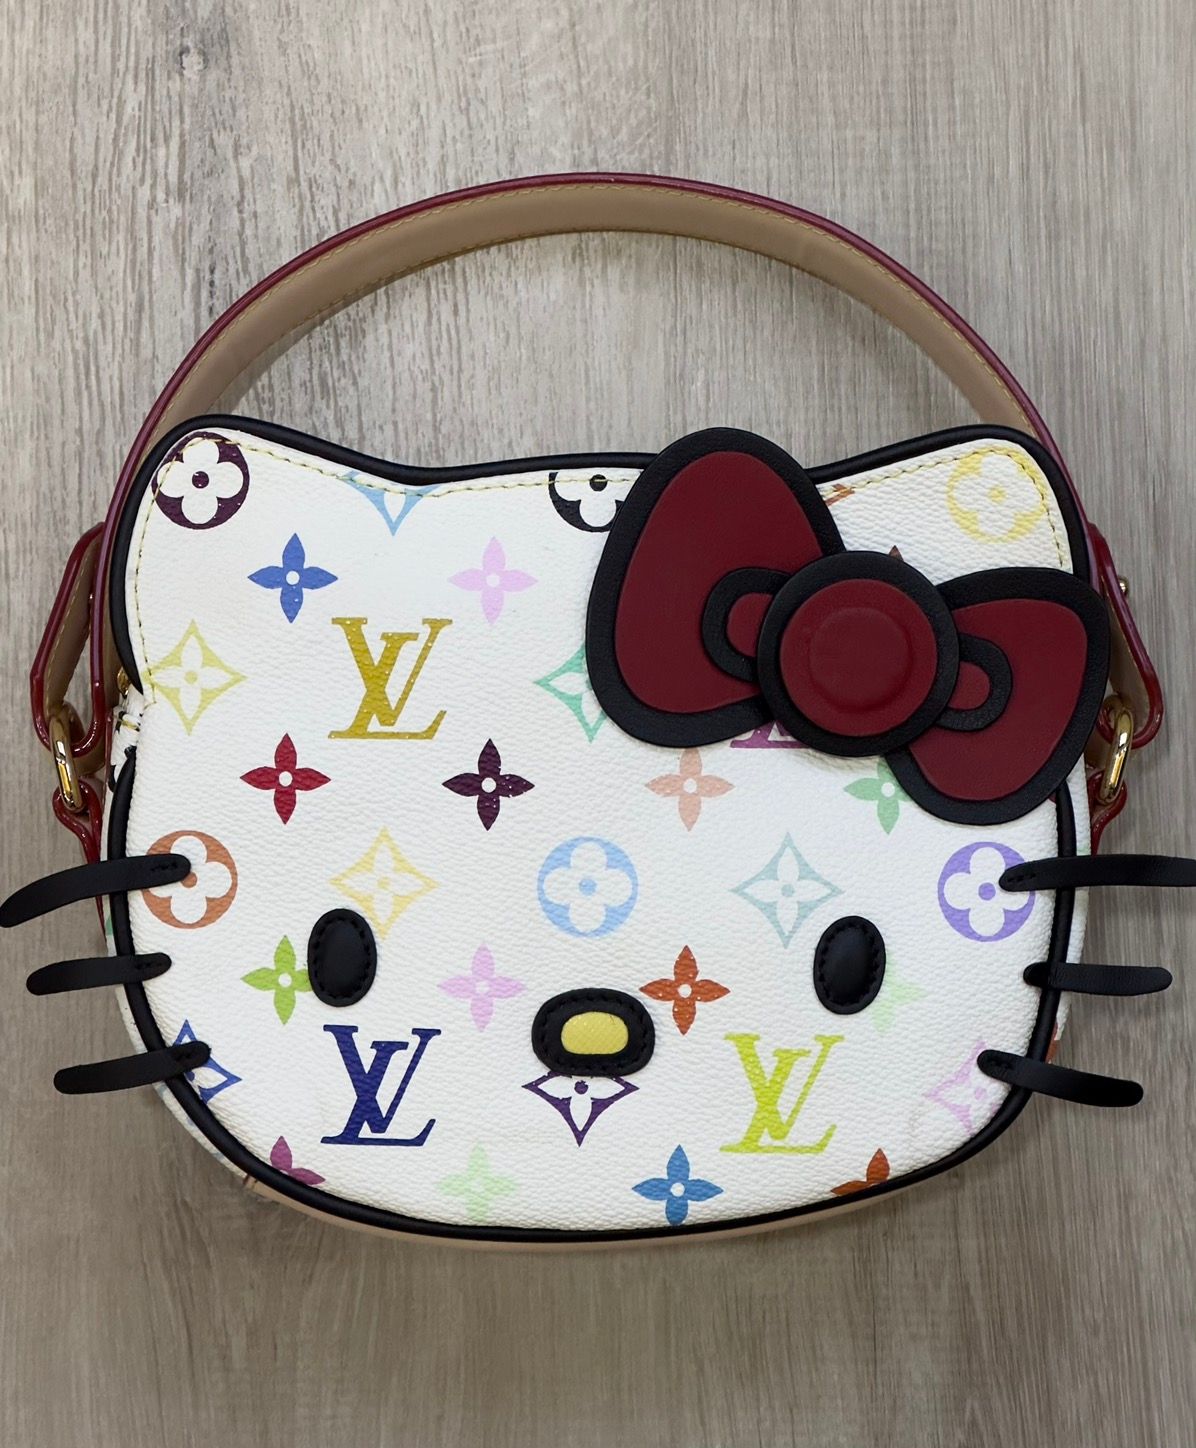 highsnobietystyle: @sheronbarber recently dropped these limited Hello Kitty  @louisvuitton bags on @ntwrk, selling out within 10 minutes.…